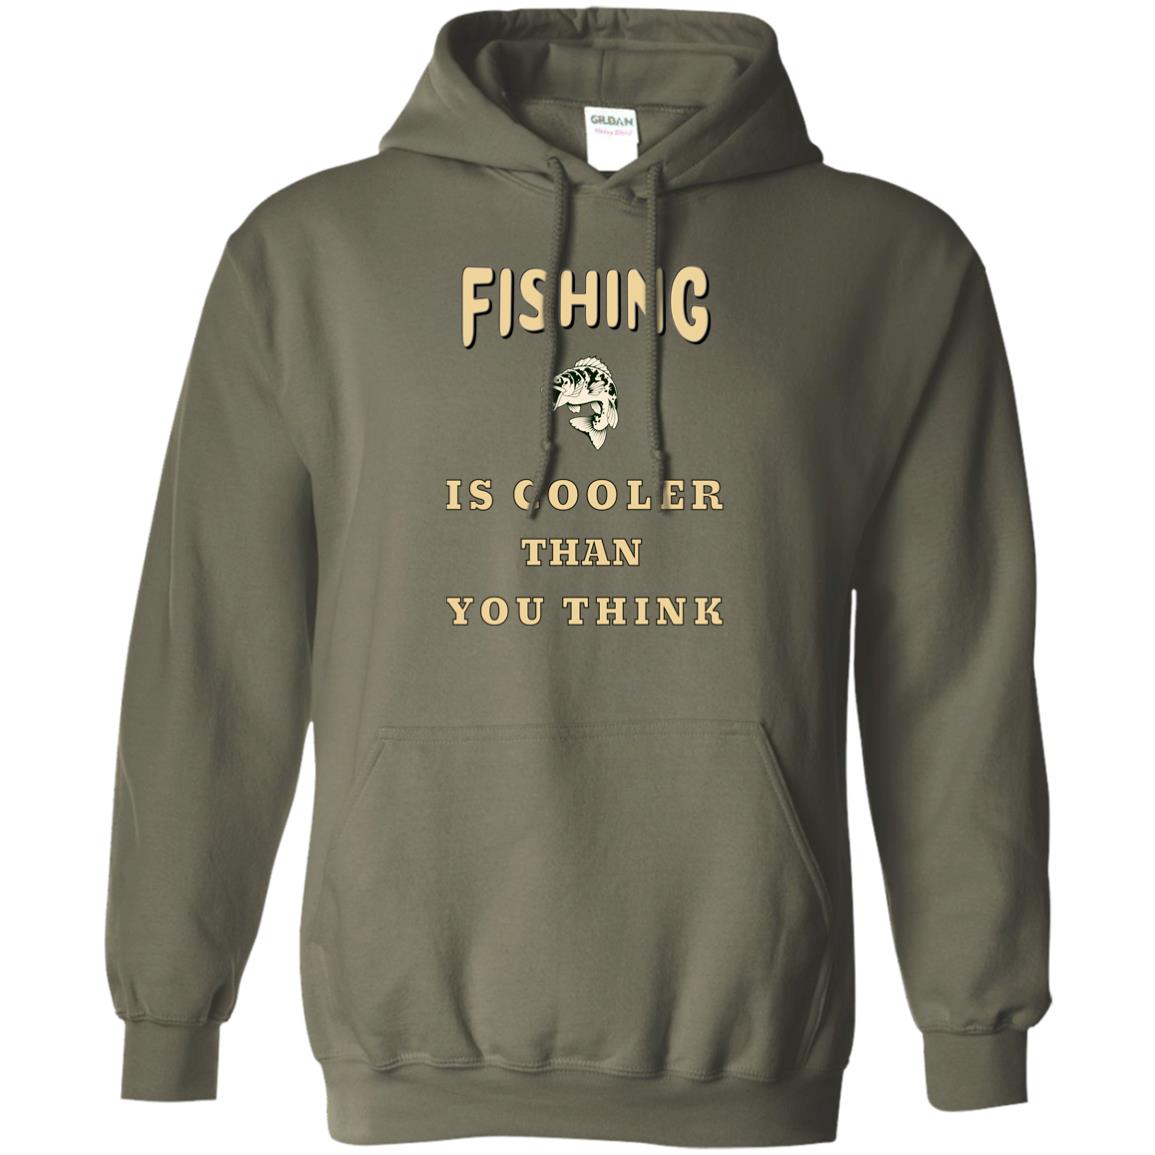 Fishing is cooler than you think pullover hoodie k military-green